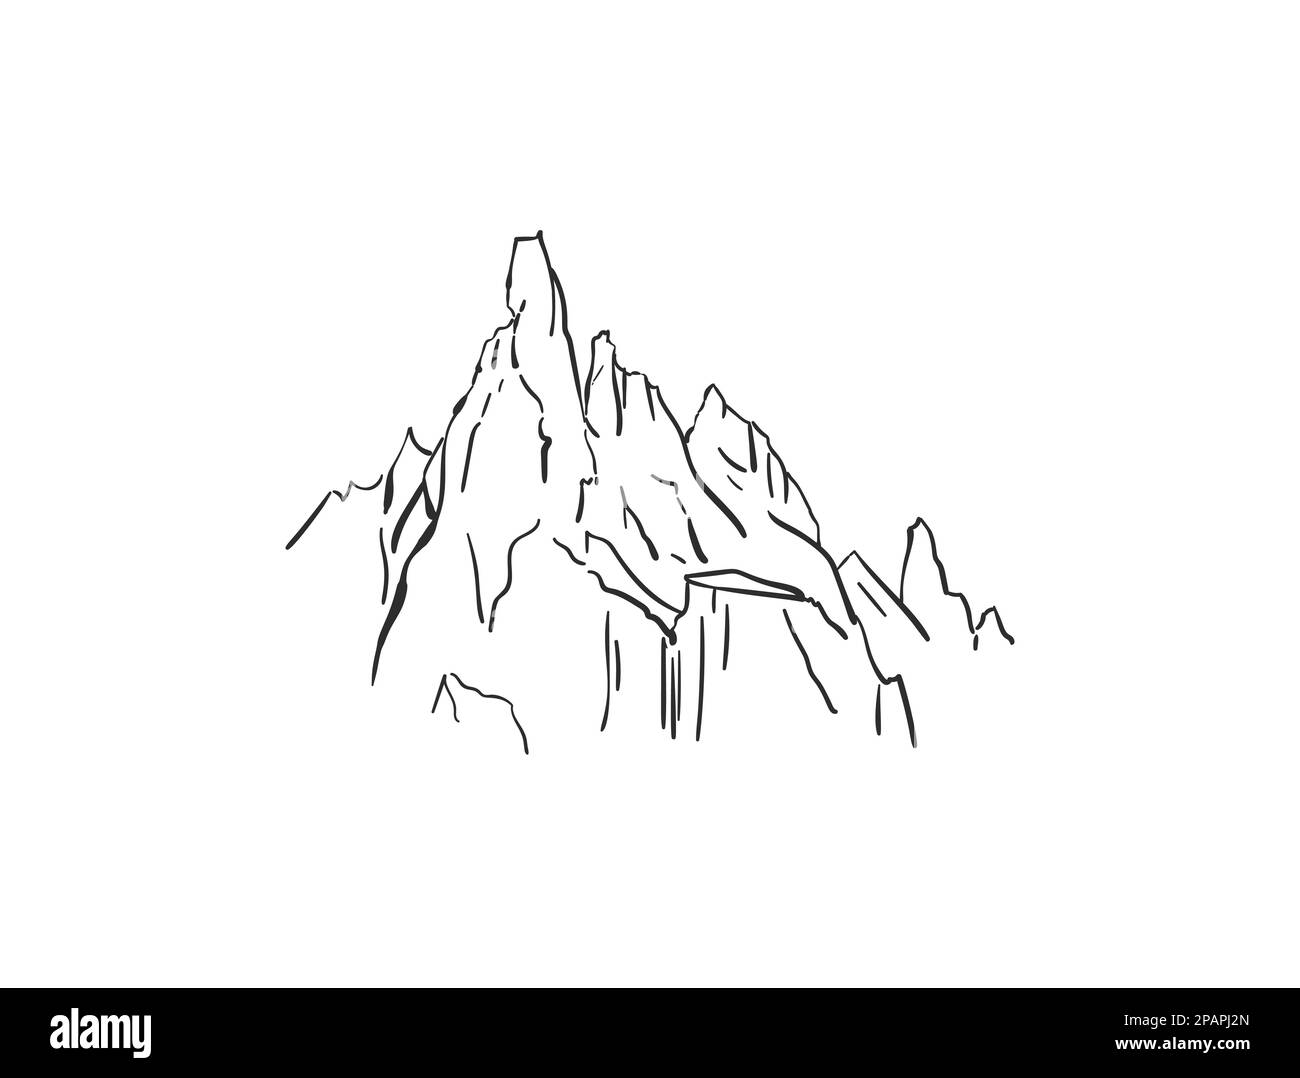 Linear sketch of Cerro Torre mountain in Patagonia, Hand drawn vector illustration Stock Vector